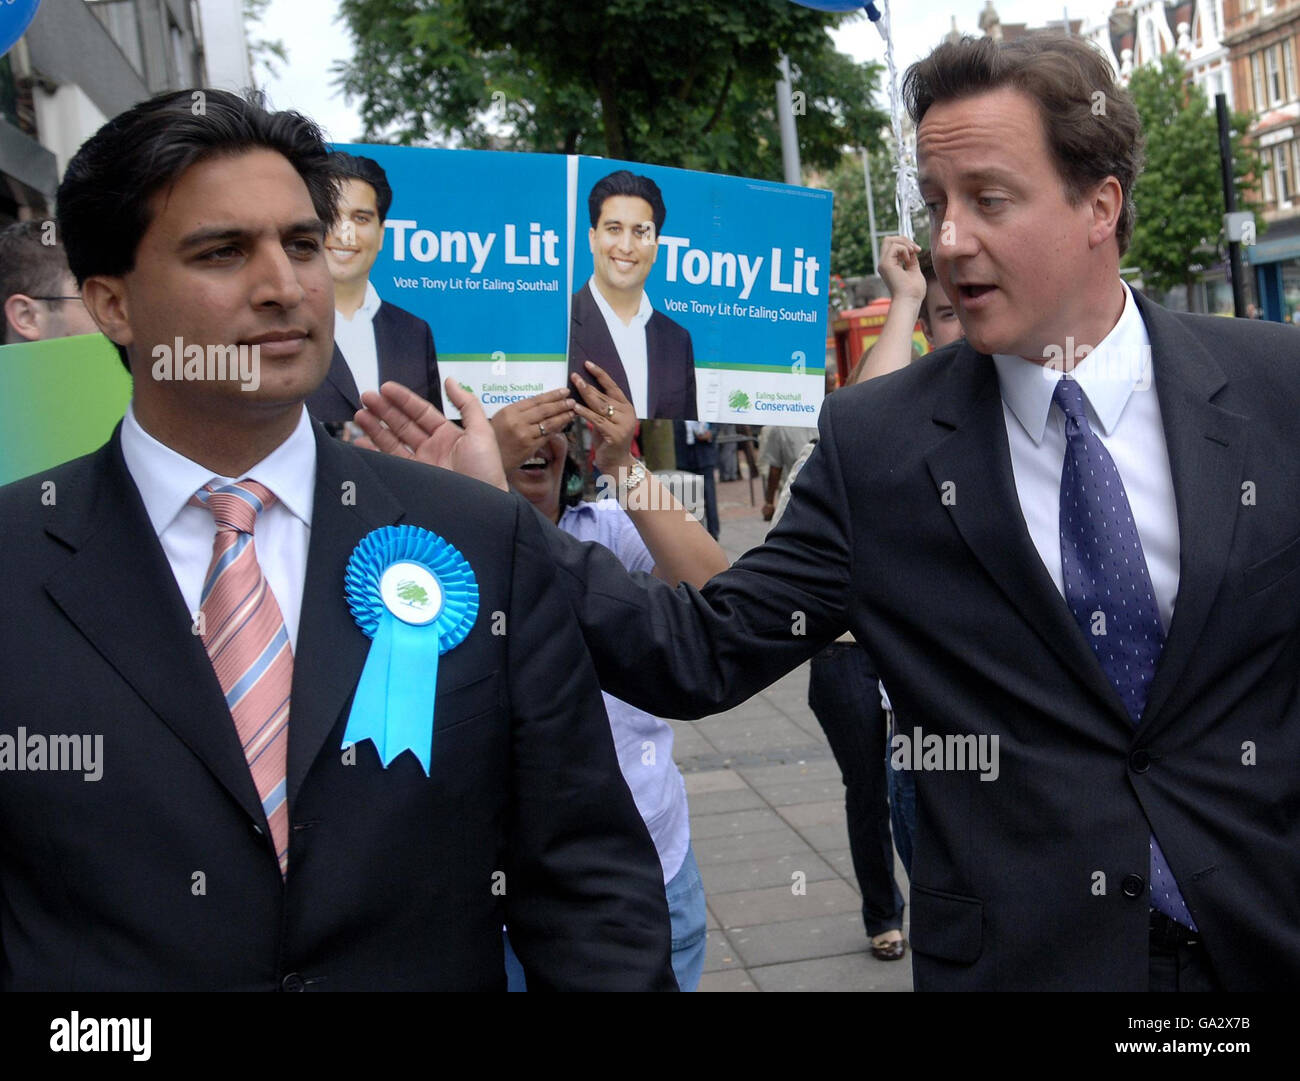 David Cameron campaigns in Ealing Stock Photo